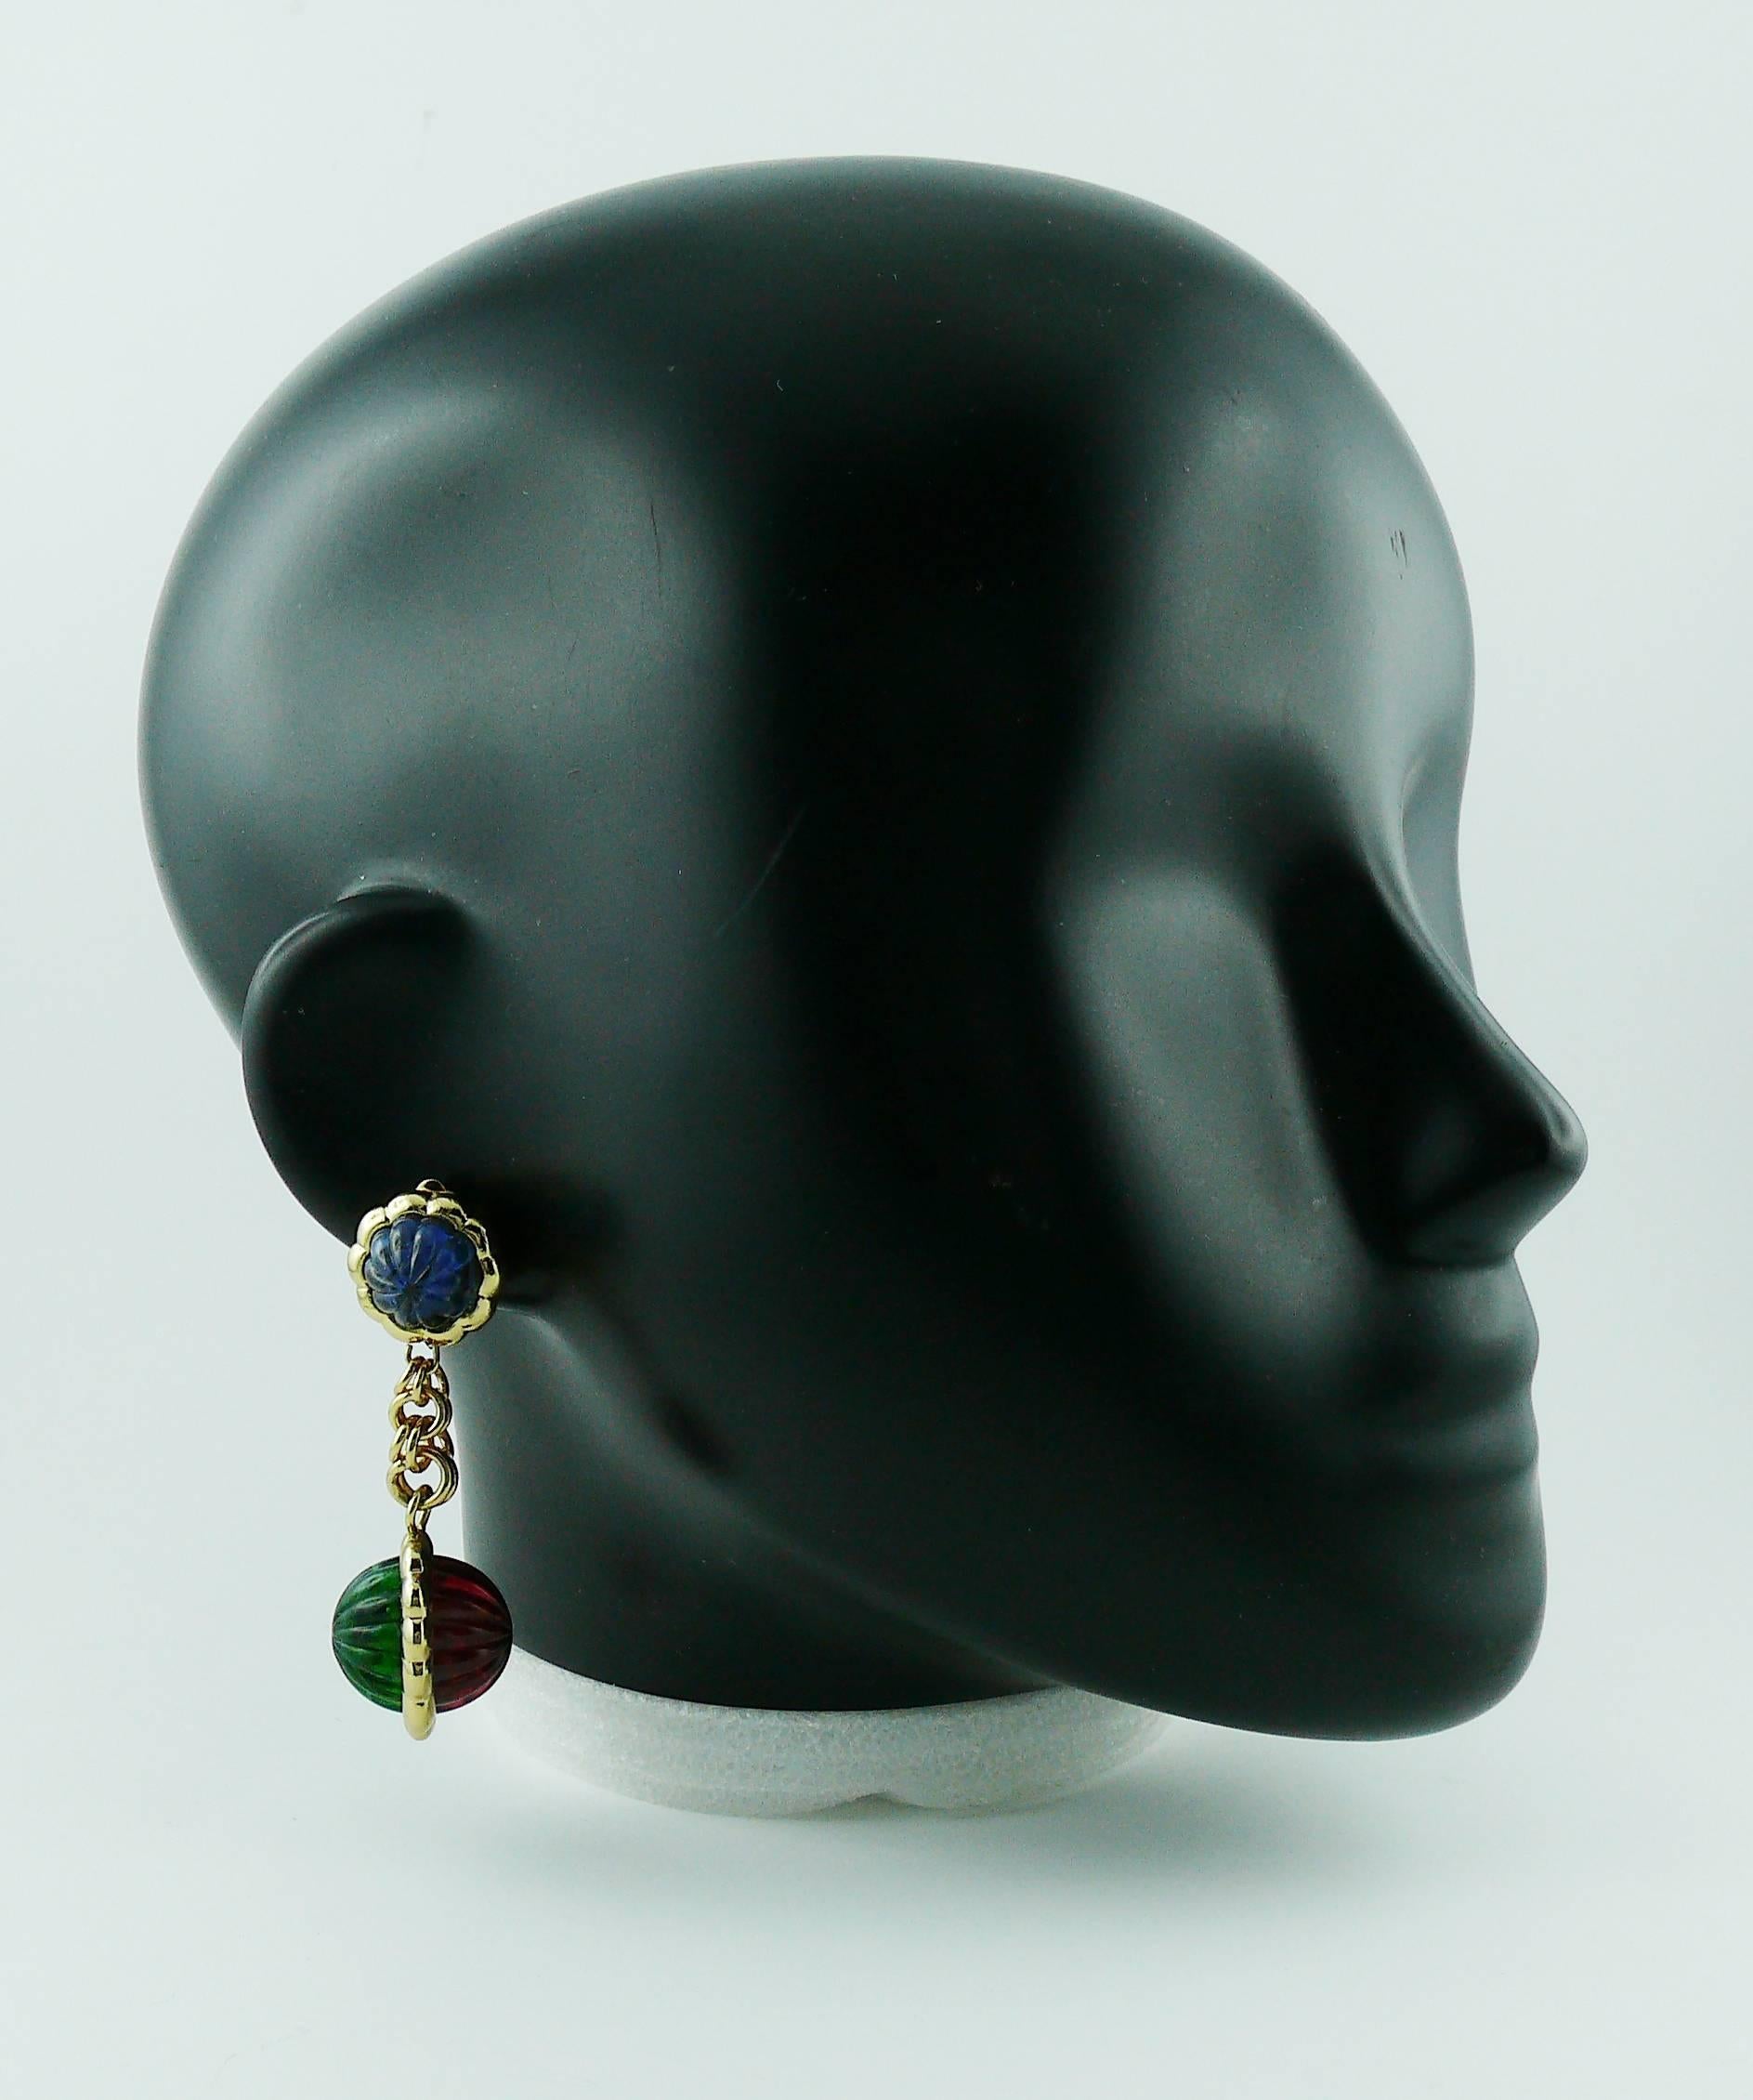 CHRISTIAN DIOR vintage dangling earrings (for pierced ears) featuring faux gems (ruby, sapphire, emerald) glass cabochons in a gold toned setting.

Marked CHR. DIOR © Germany.

Indicative measurements : height approx. 6.5 cm (2.56 inches) / max.